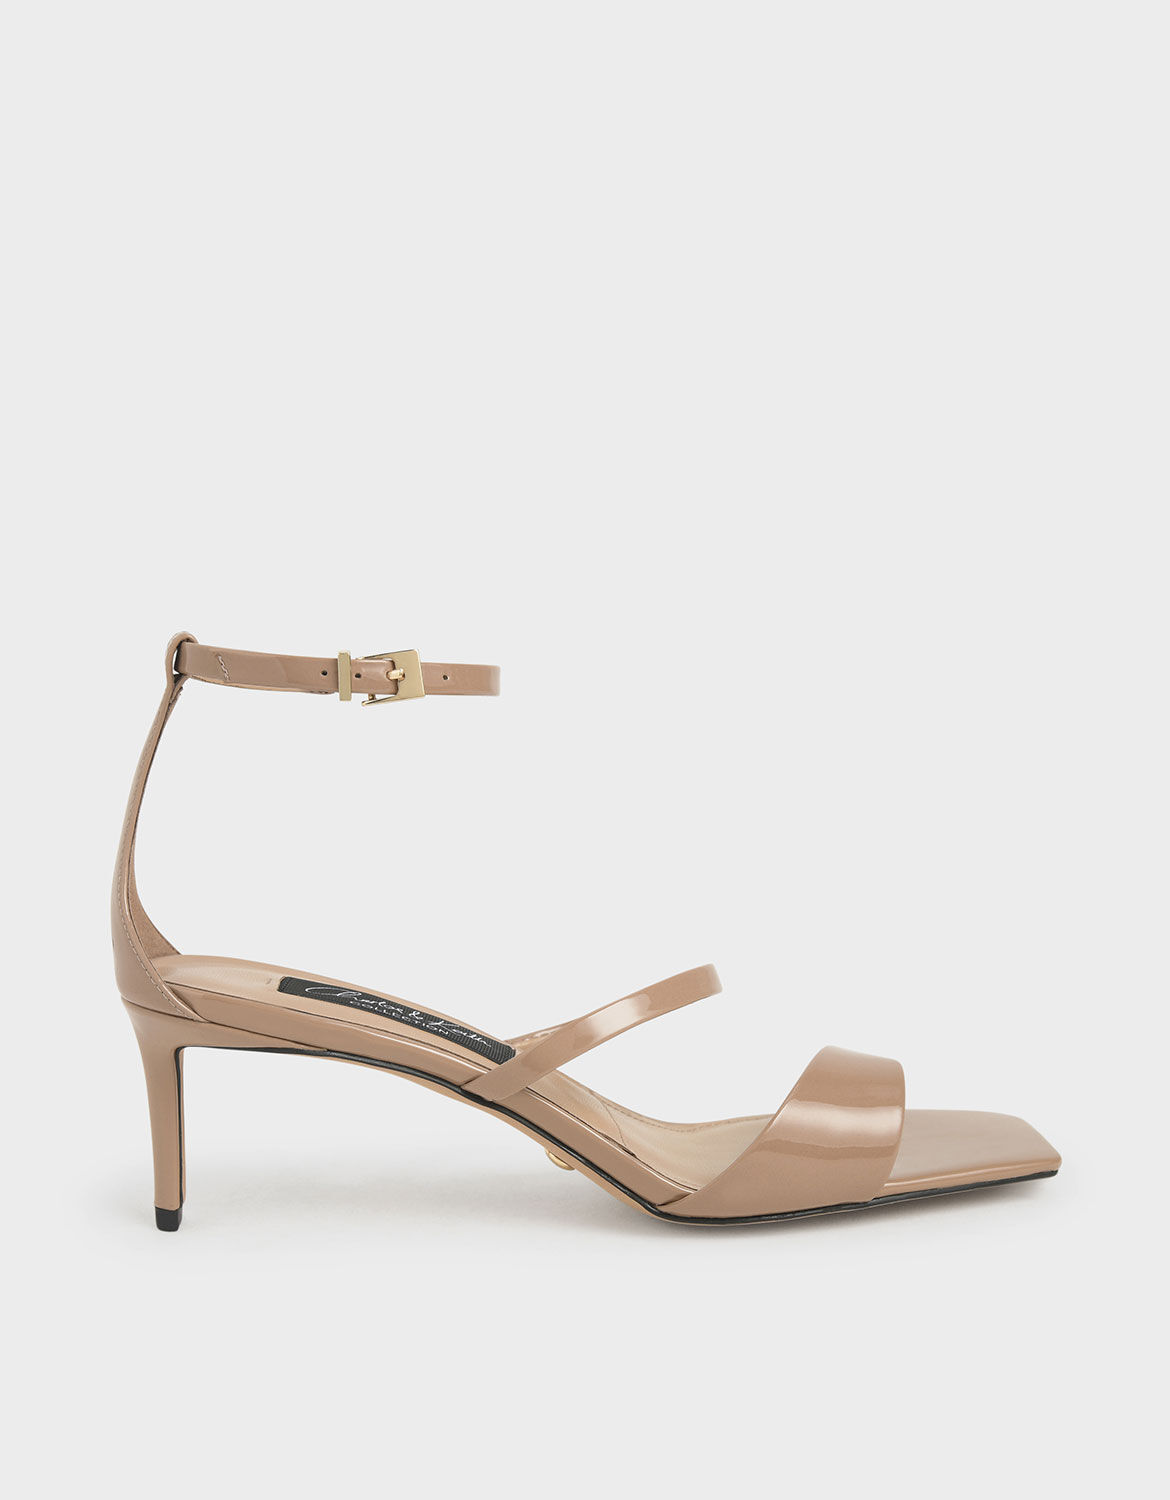 Nude Patent Leather Strappy Heeled 